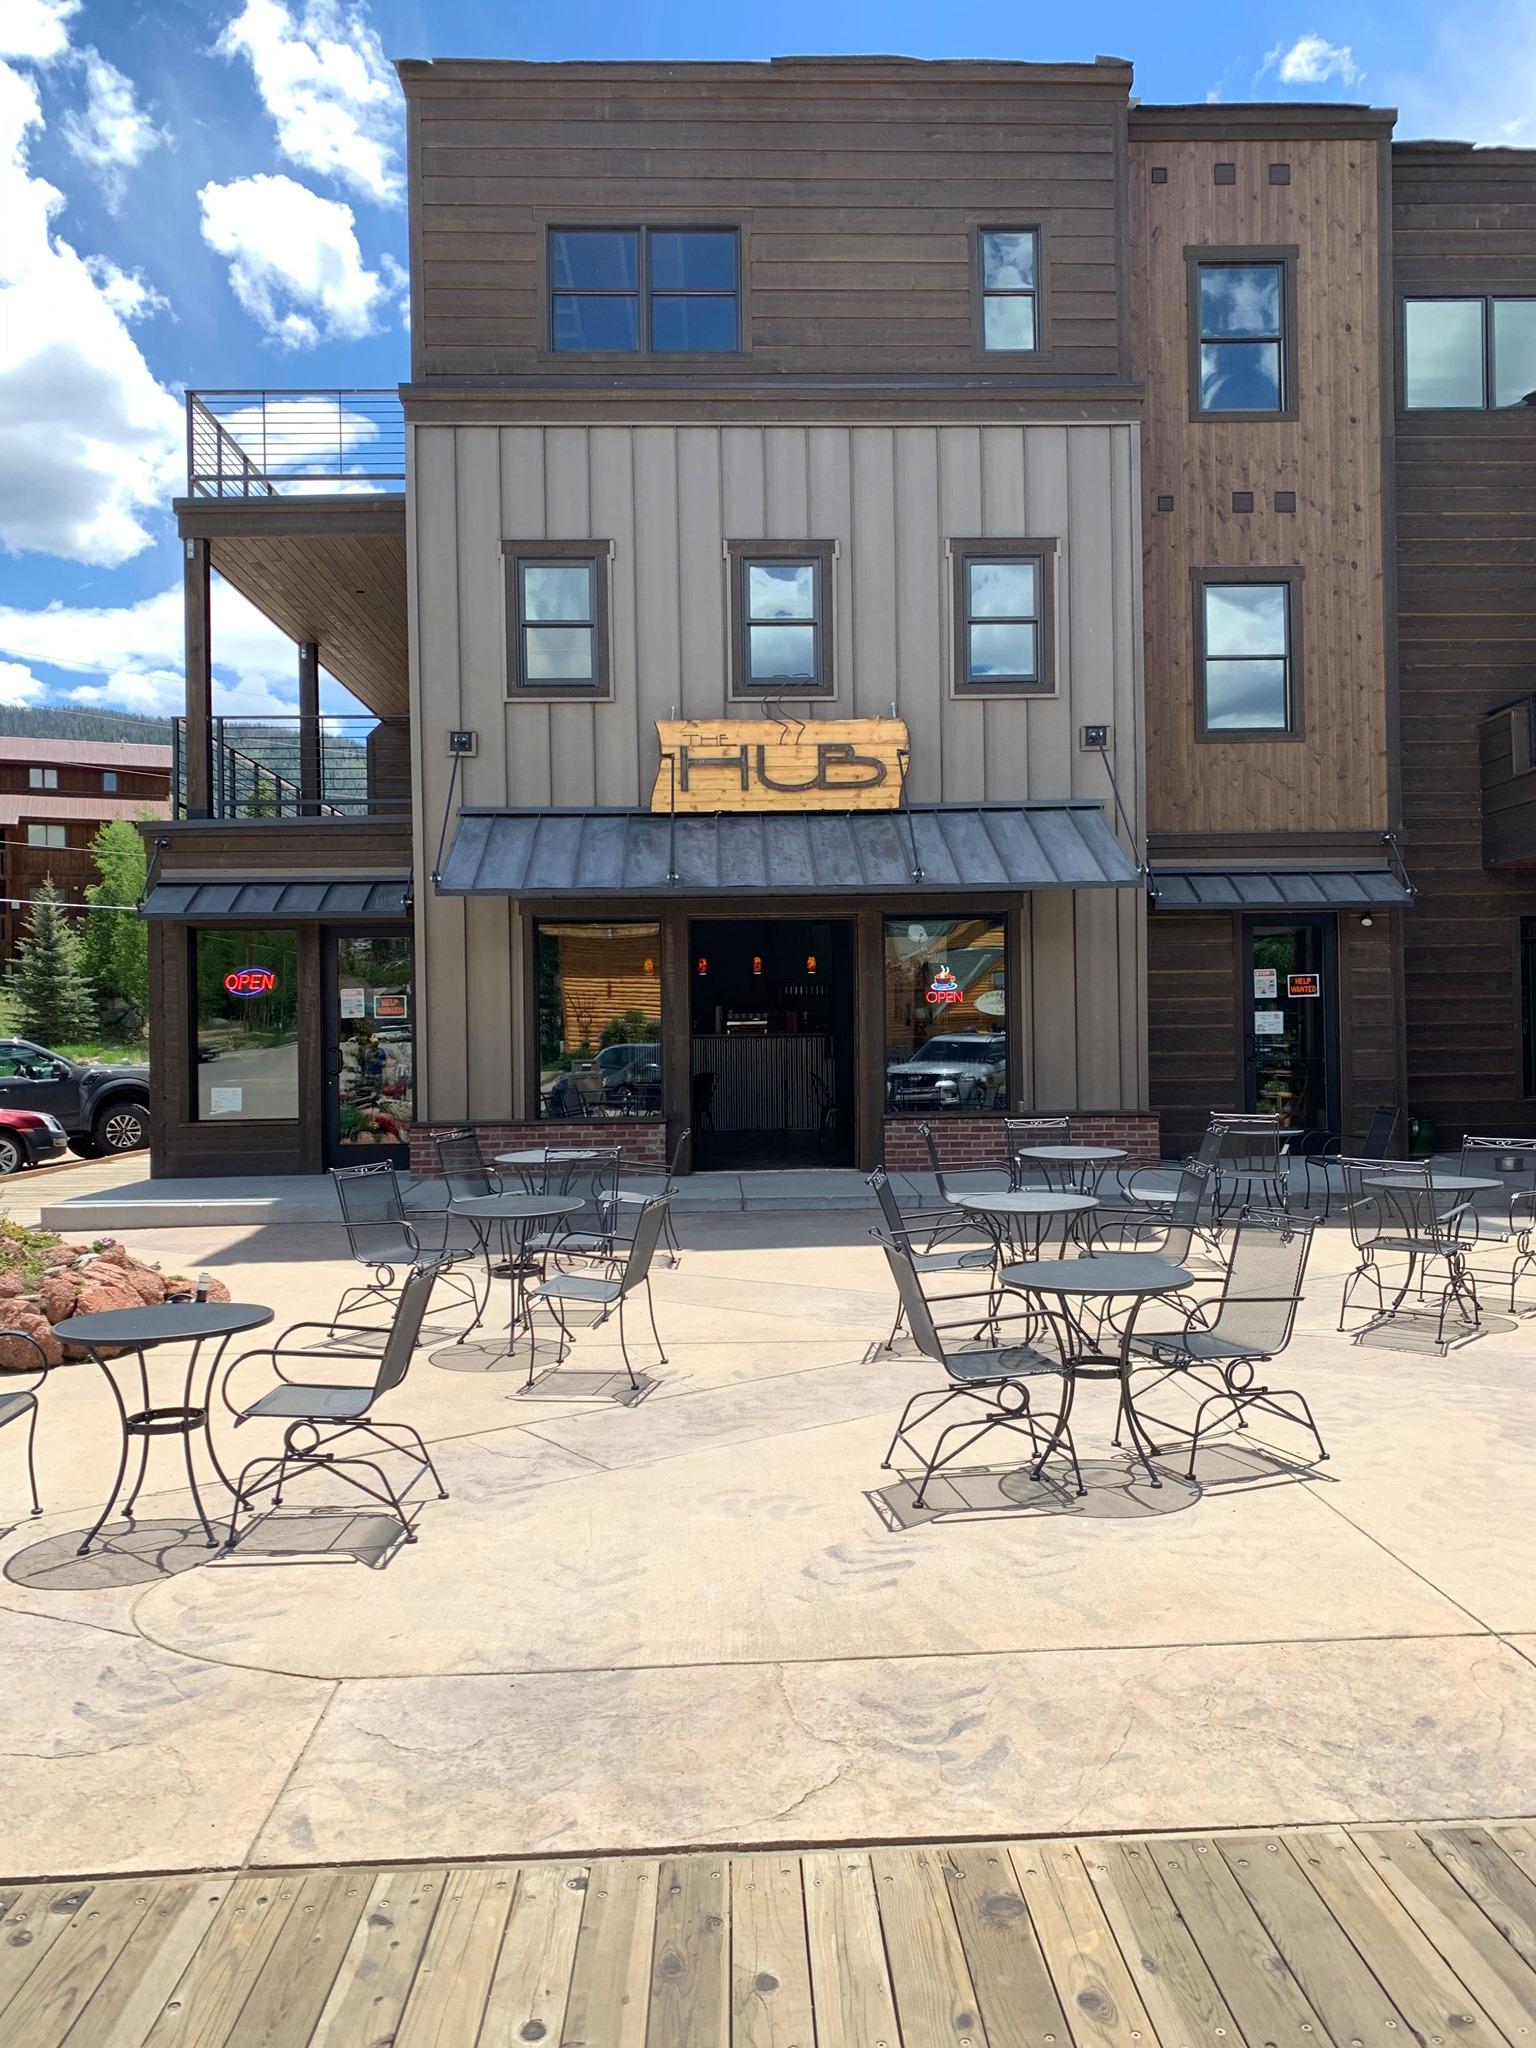 Pet Friendly The Hub Coffee and Cones